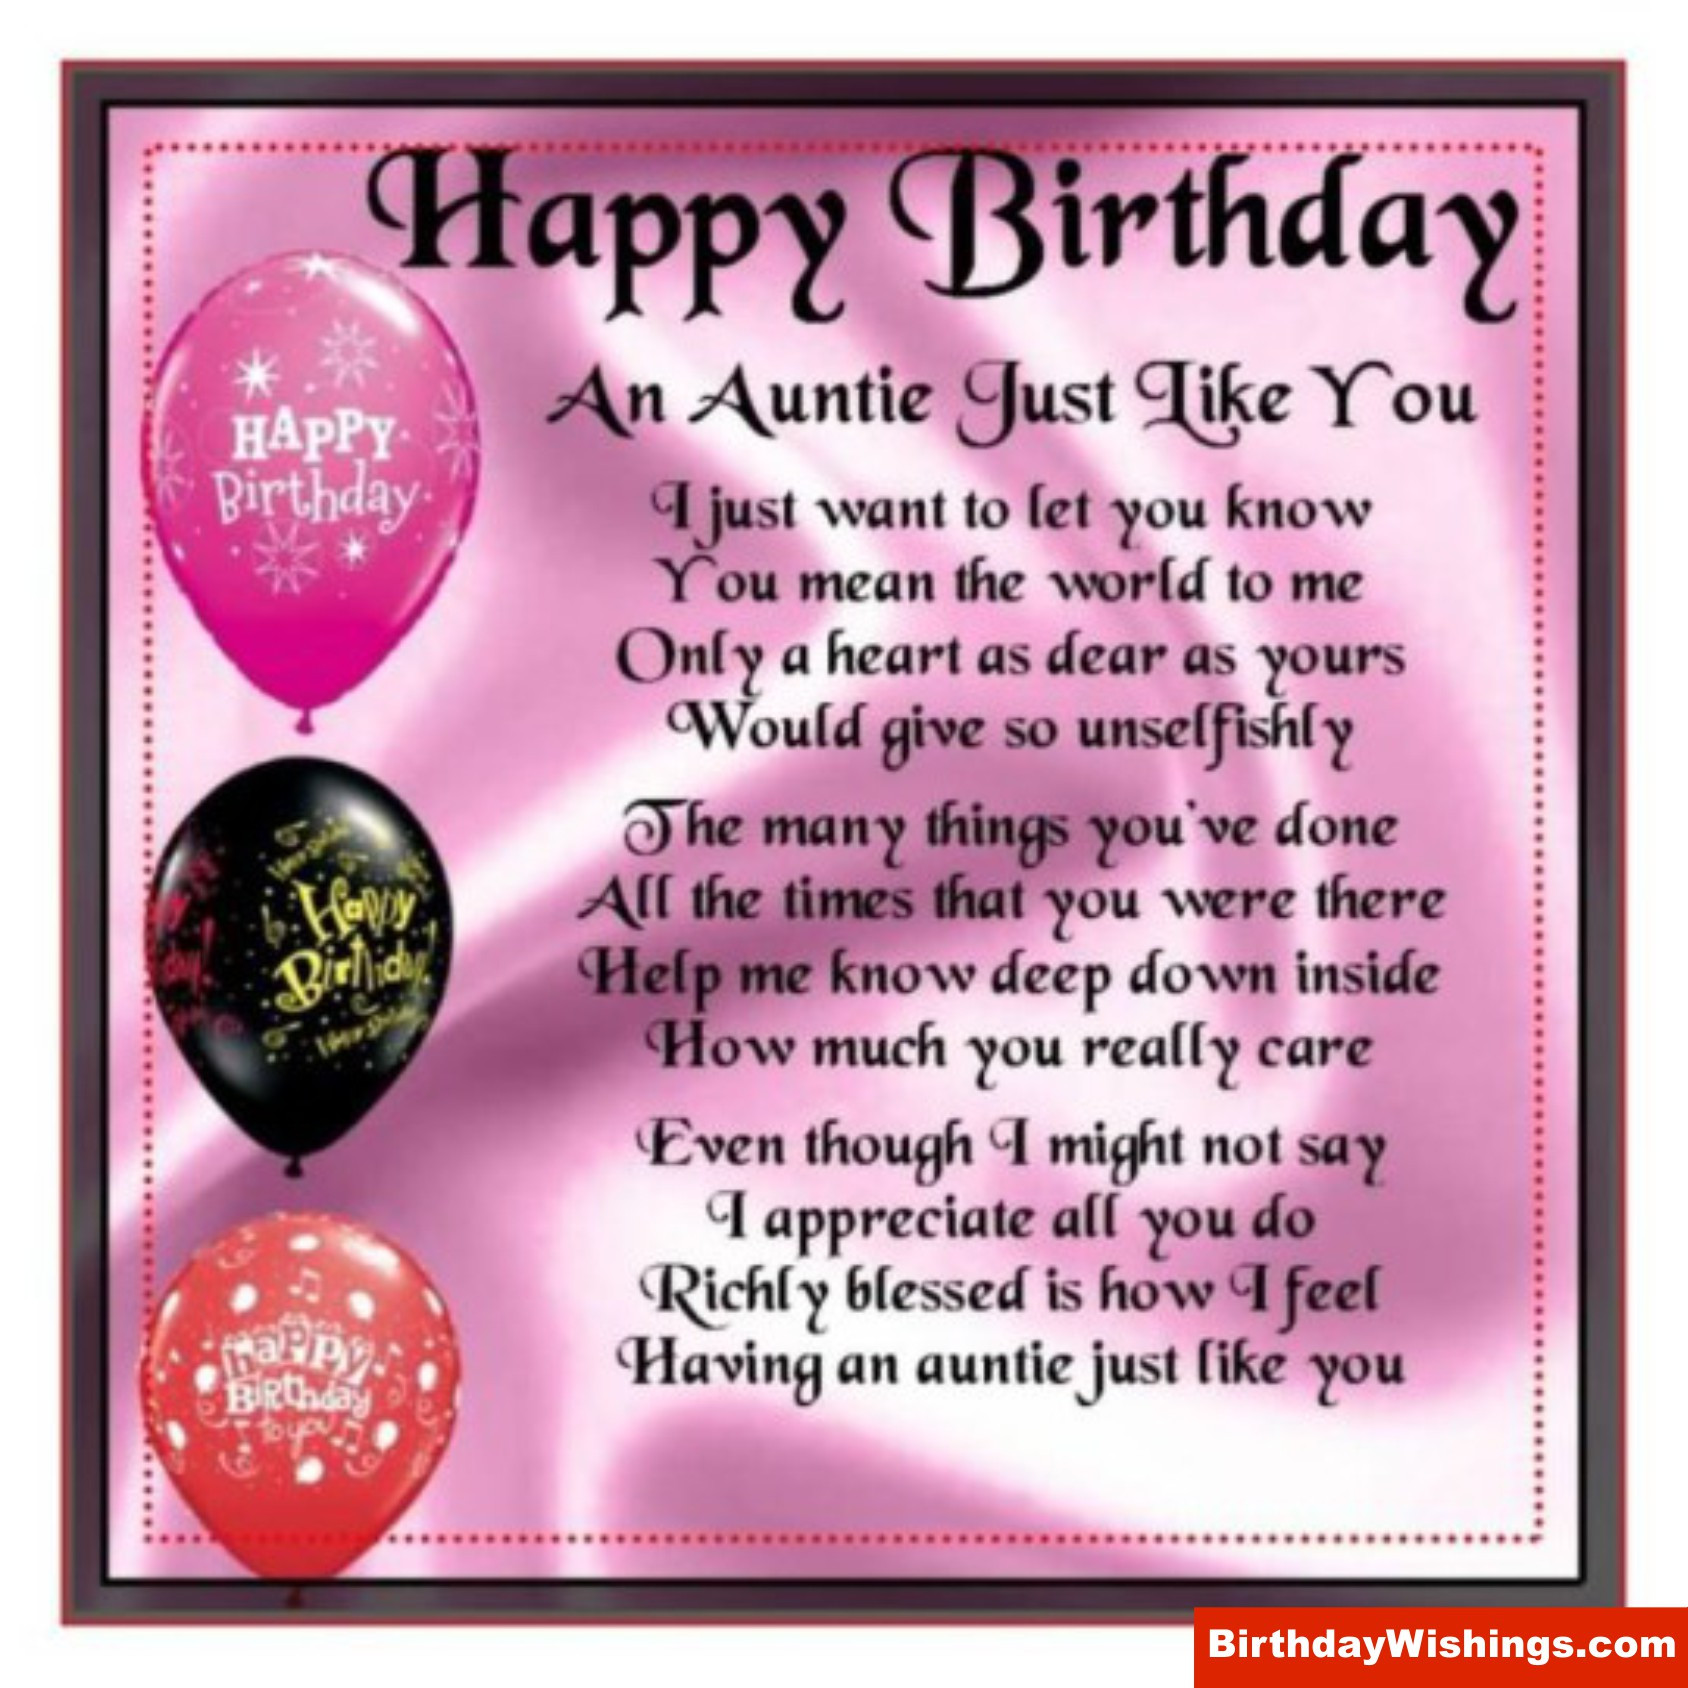 Birthday Quotes For Aunt
 Wish A Happy Birthday to Your Aunt